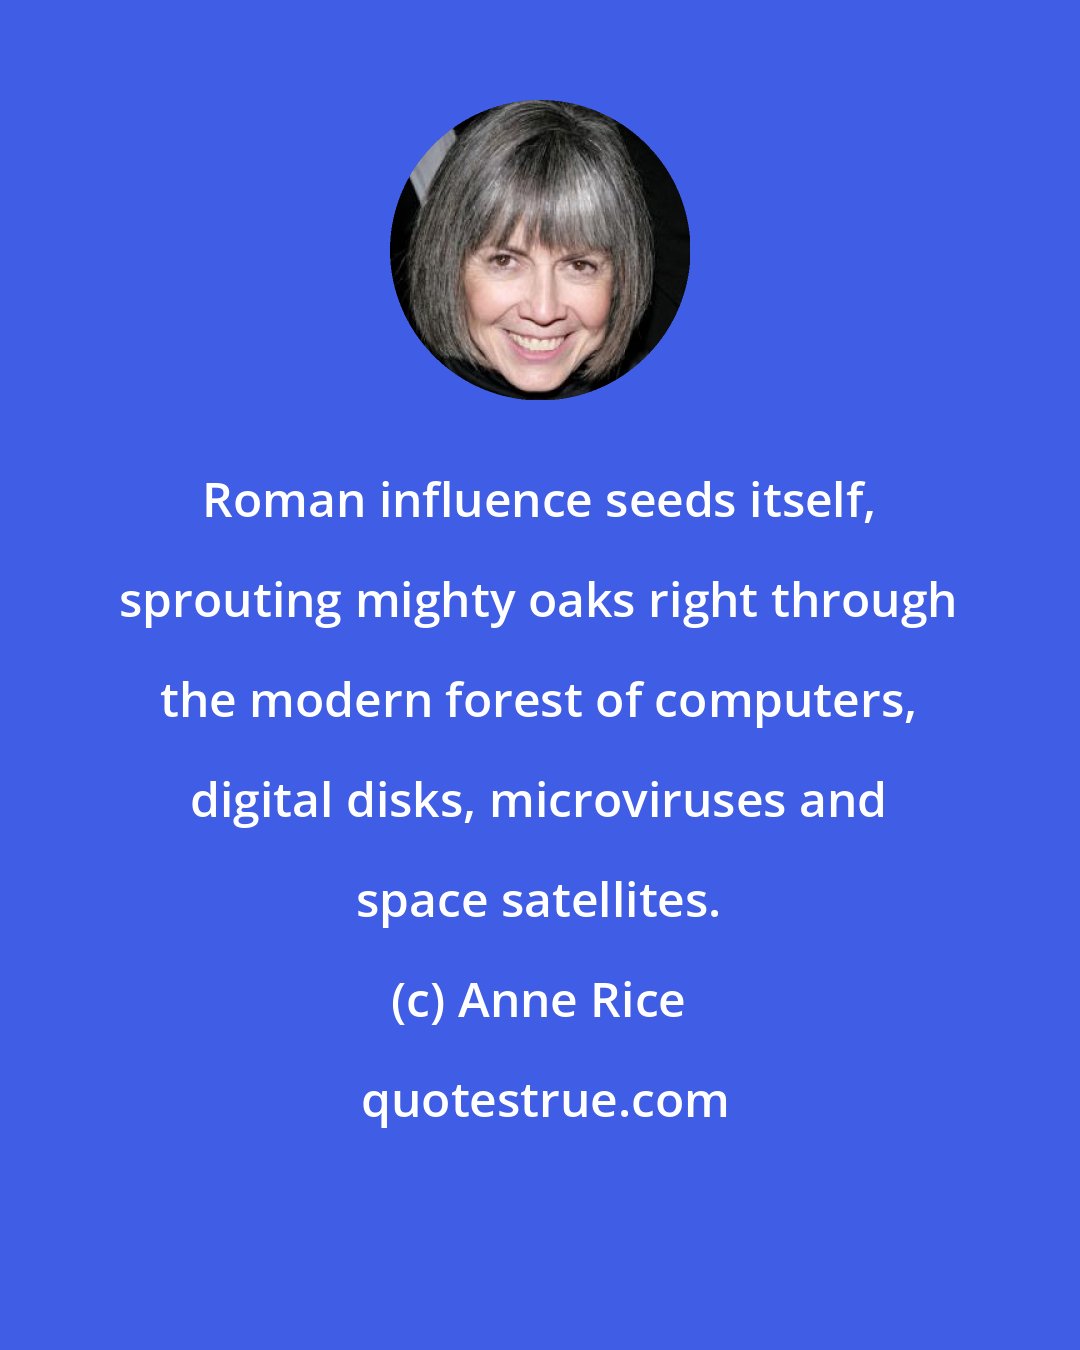 Anne Rice: Roman influence seeds itself, sprouting mighty oaks right through the modern forest of computers, digital disks, microviruses and space satellites.